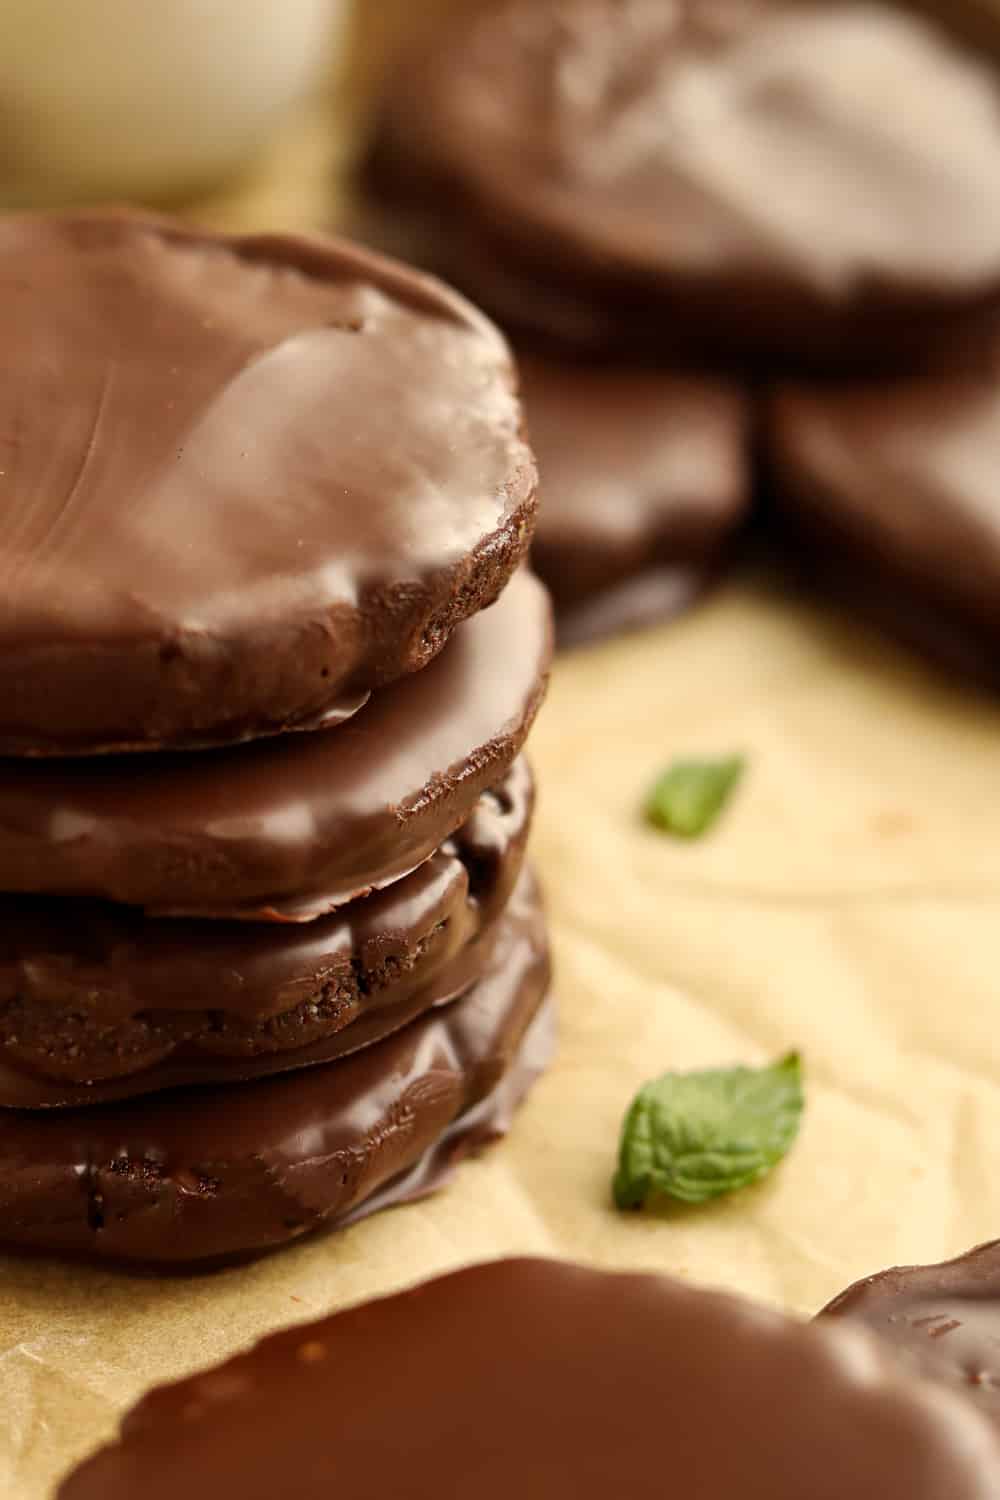 The side of four chocolate cookies stacked on top of each other; there are two green mint leaves next to the cookies.